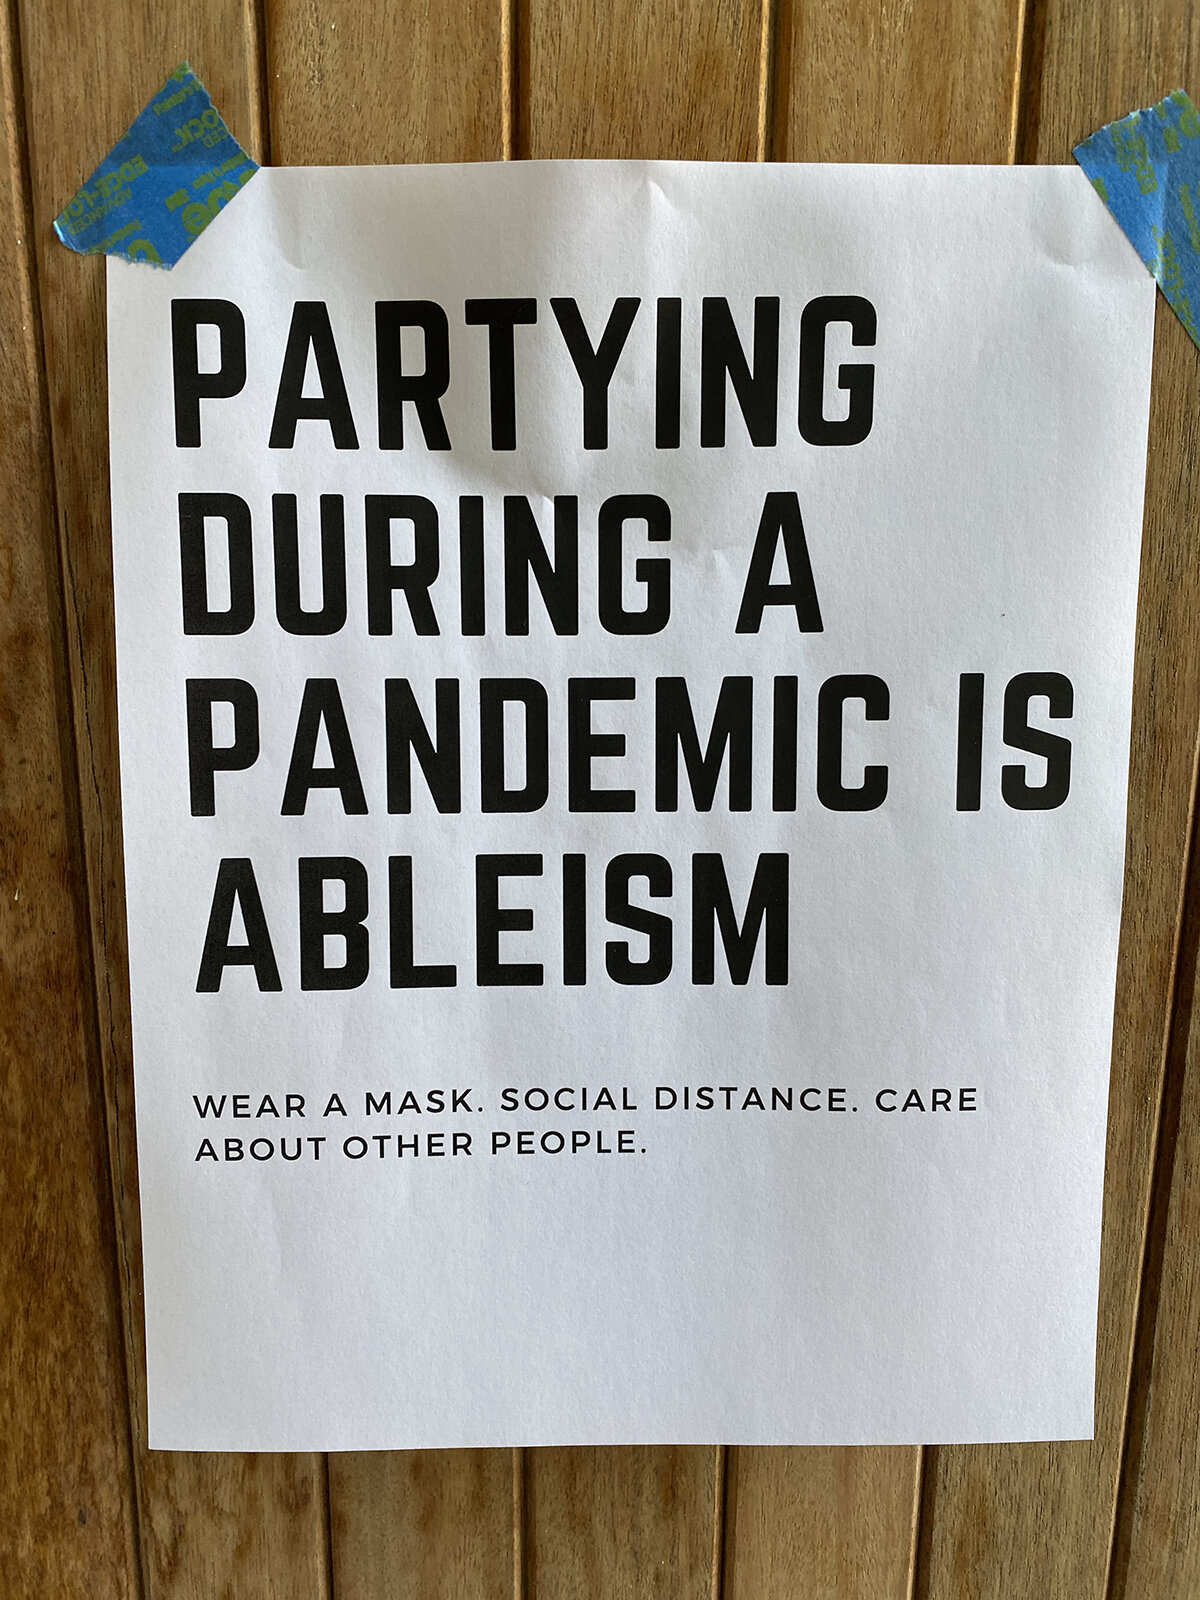 Image of sign partying during a pandemic is ableism